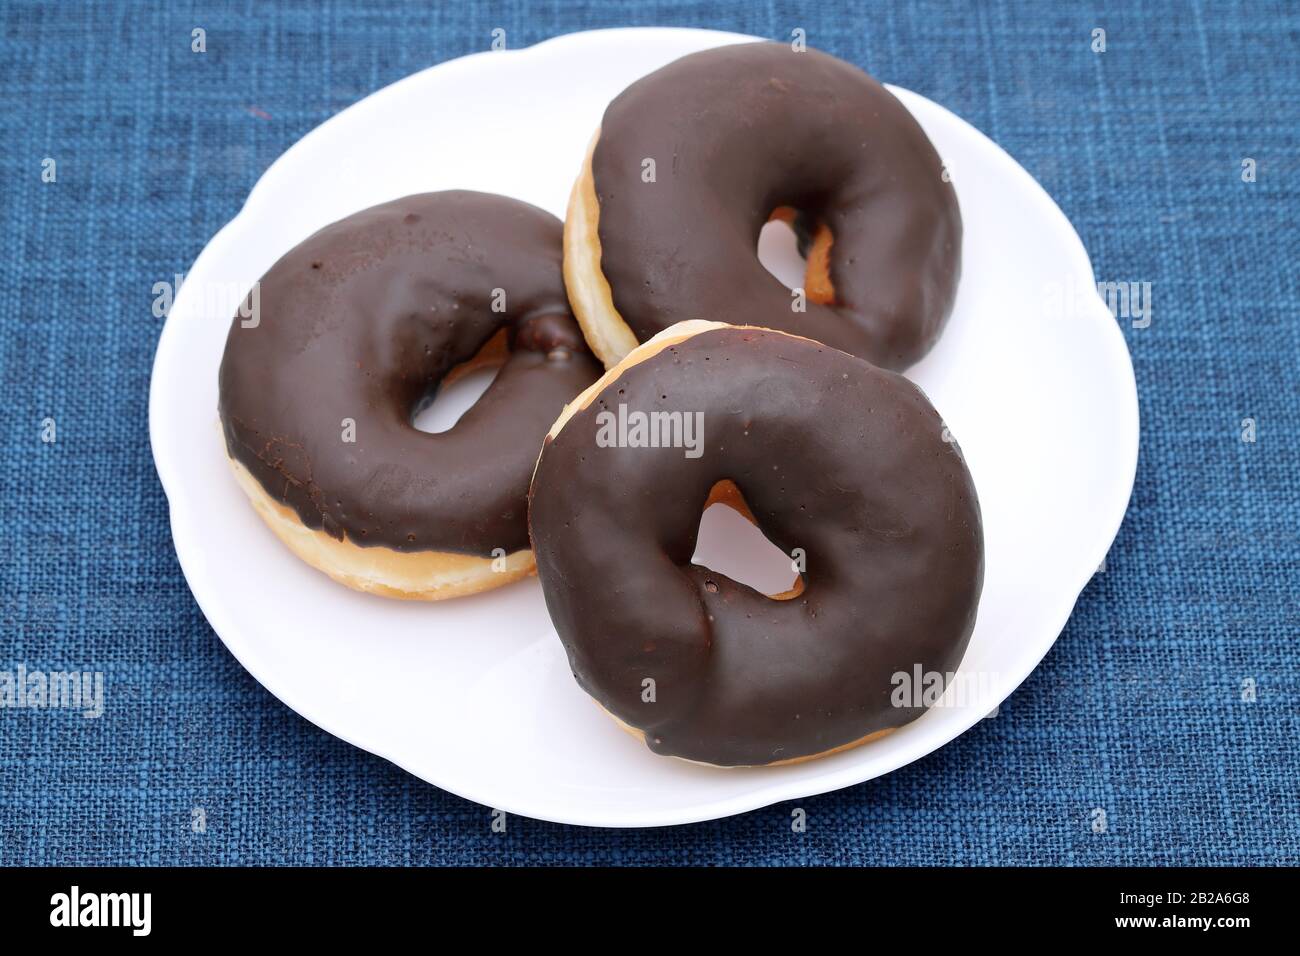 Donut with chocolate on a plate on table. Close-up Stock Photo